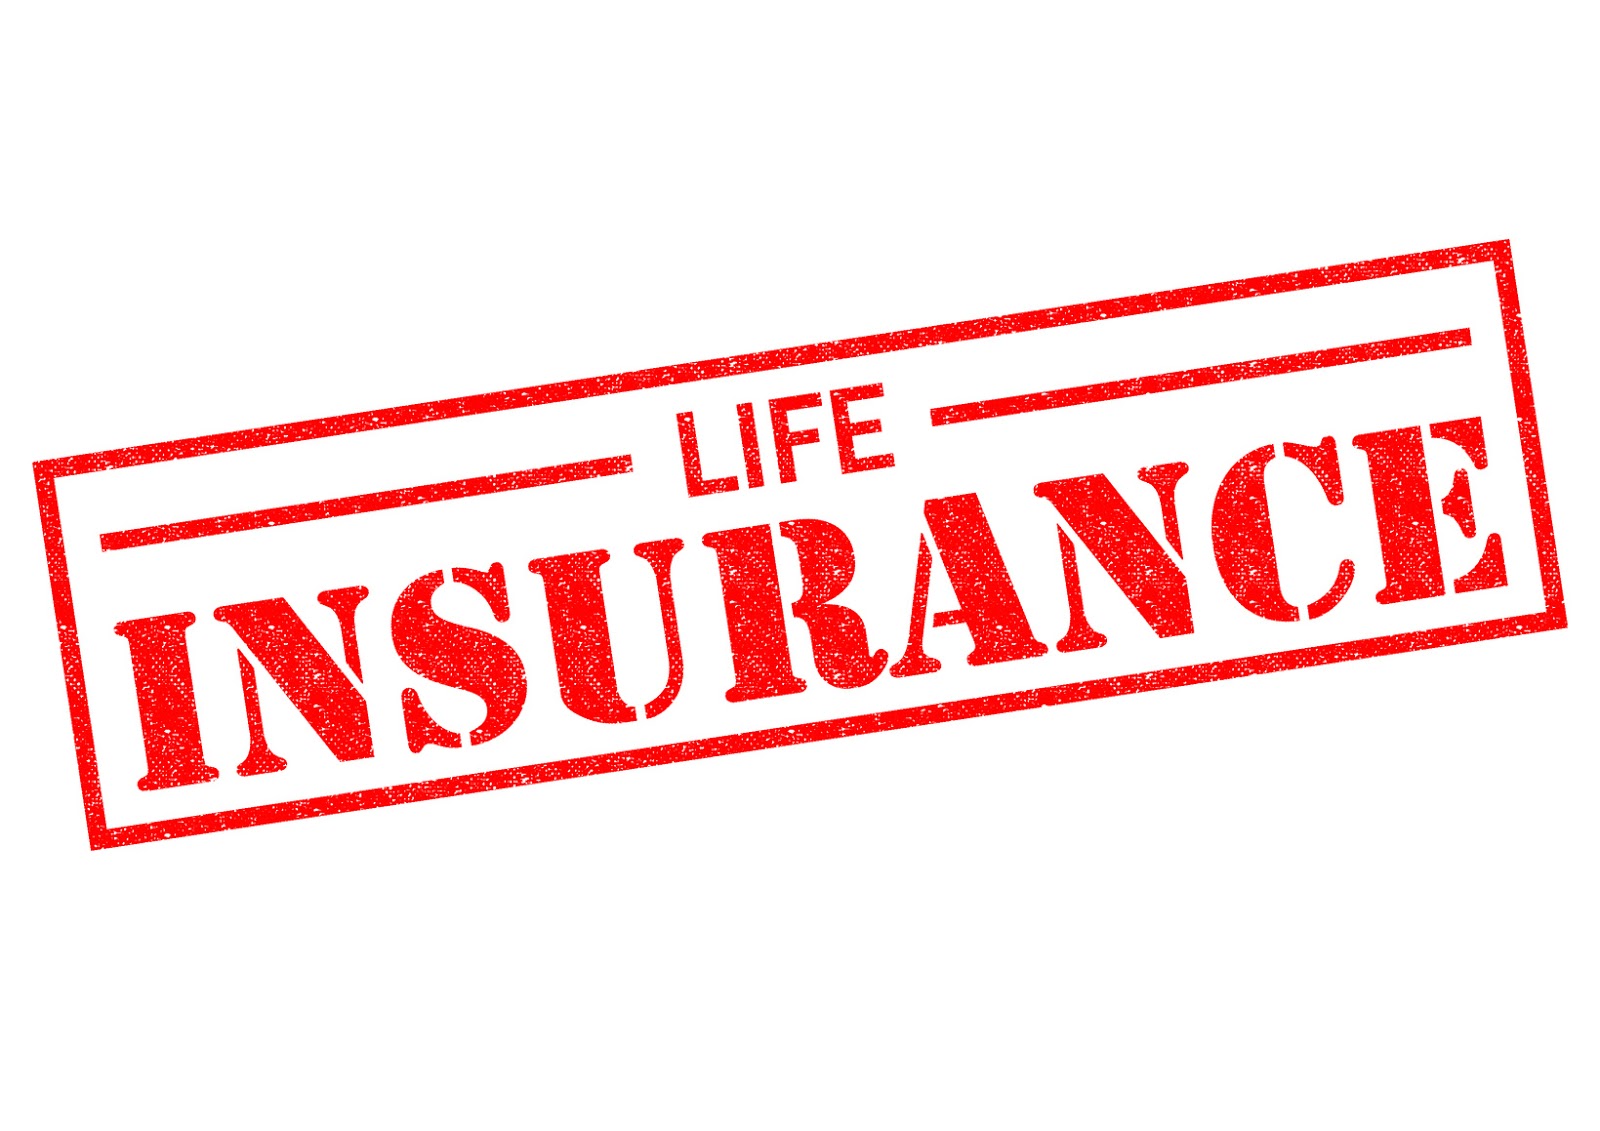 banking-insurance-world-forms-of-life-insurance-policies